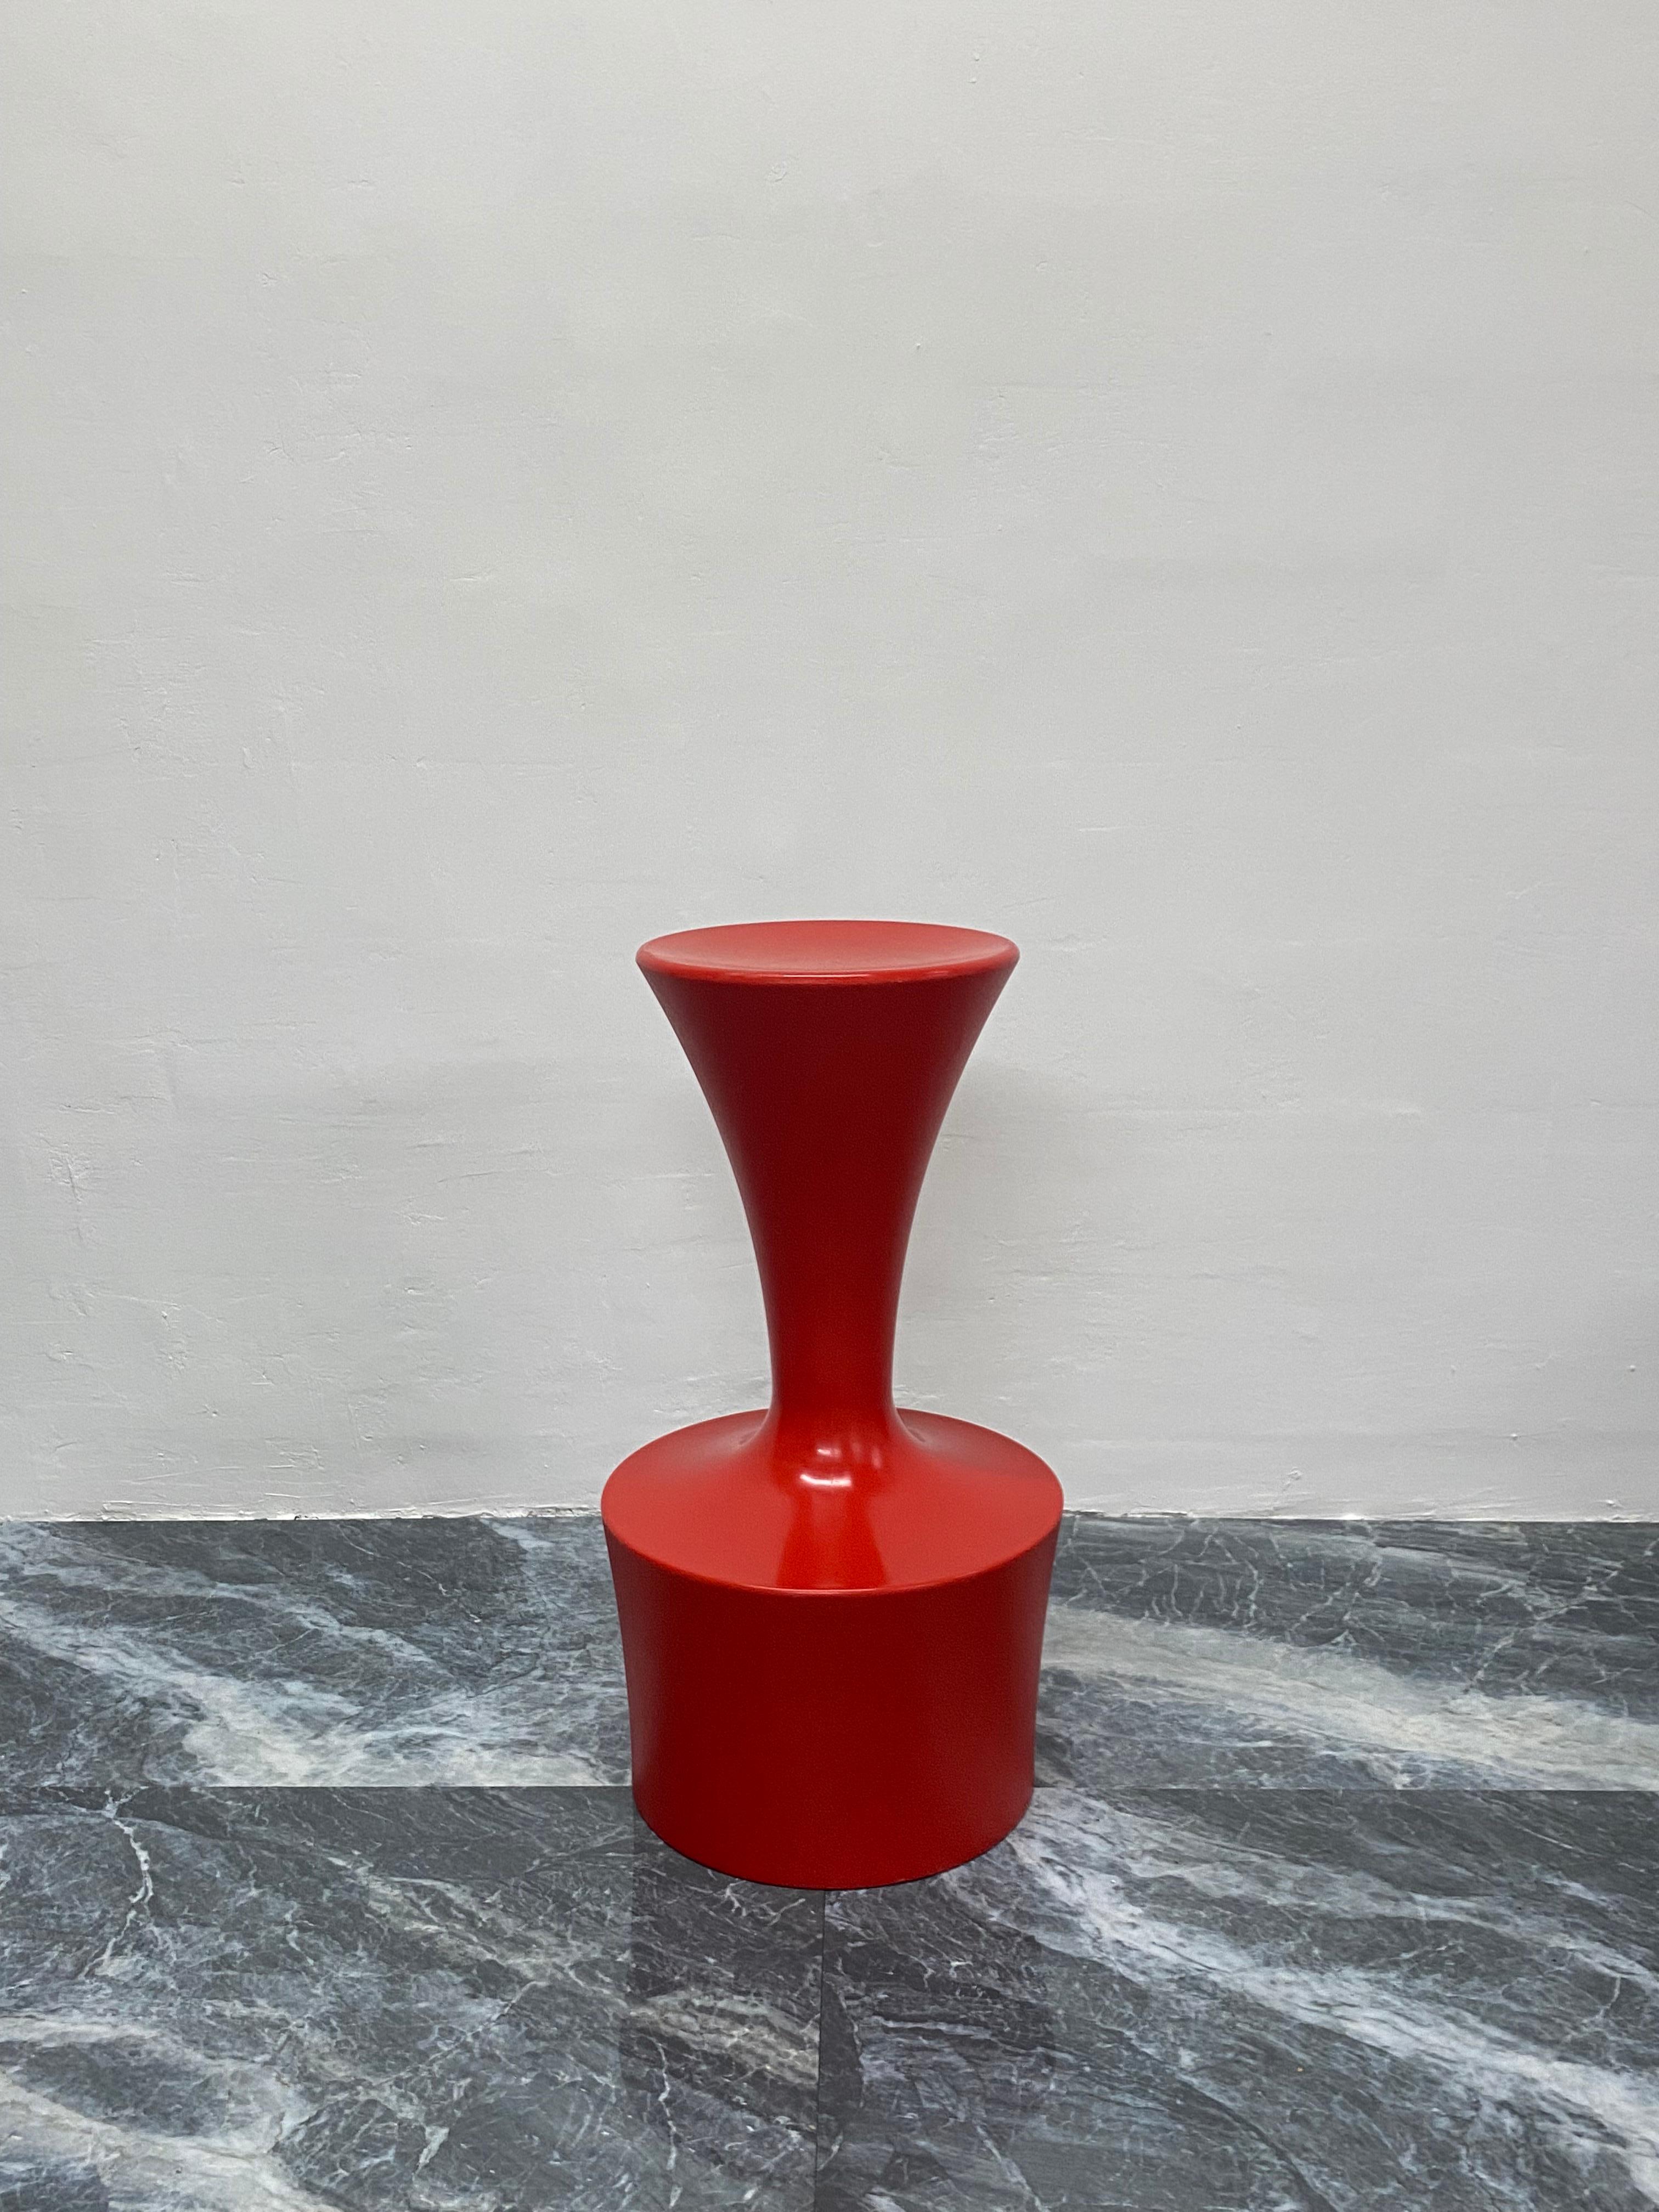 Single lipstick red Hic outdoor or indoor molded plastic barstool by Bruno Houssin for Soca, France.

Exhibited on the VIA stand at the Milan design fair in 2005.

A blend of softness and geometric purity, it is also comfortable. Pleasant to the